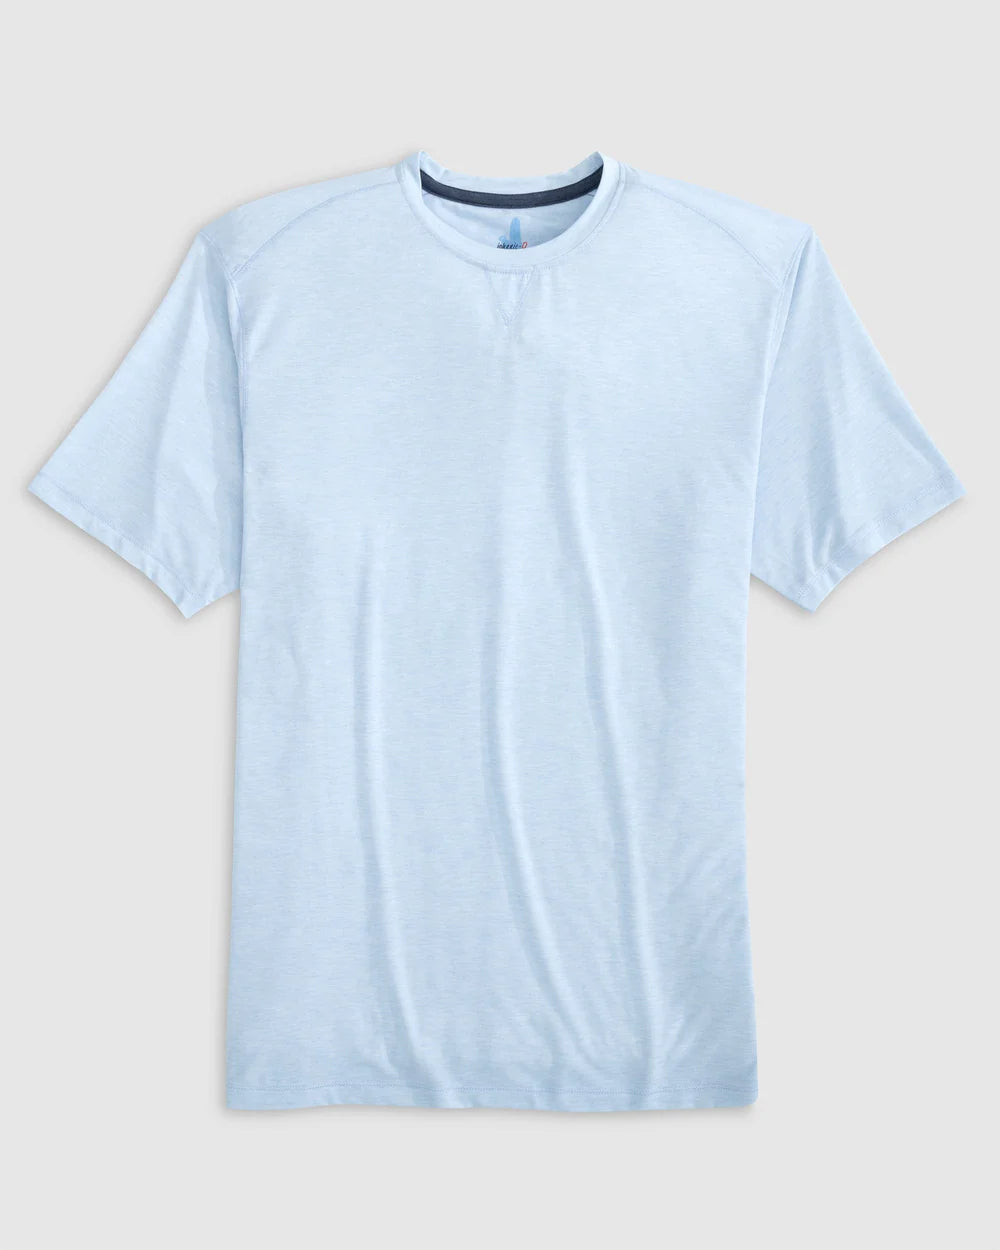 Johnnie-O The Course Performance T-Shirt - Breeze